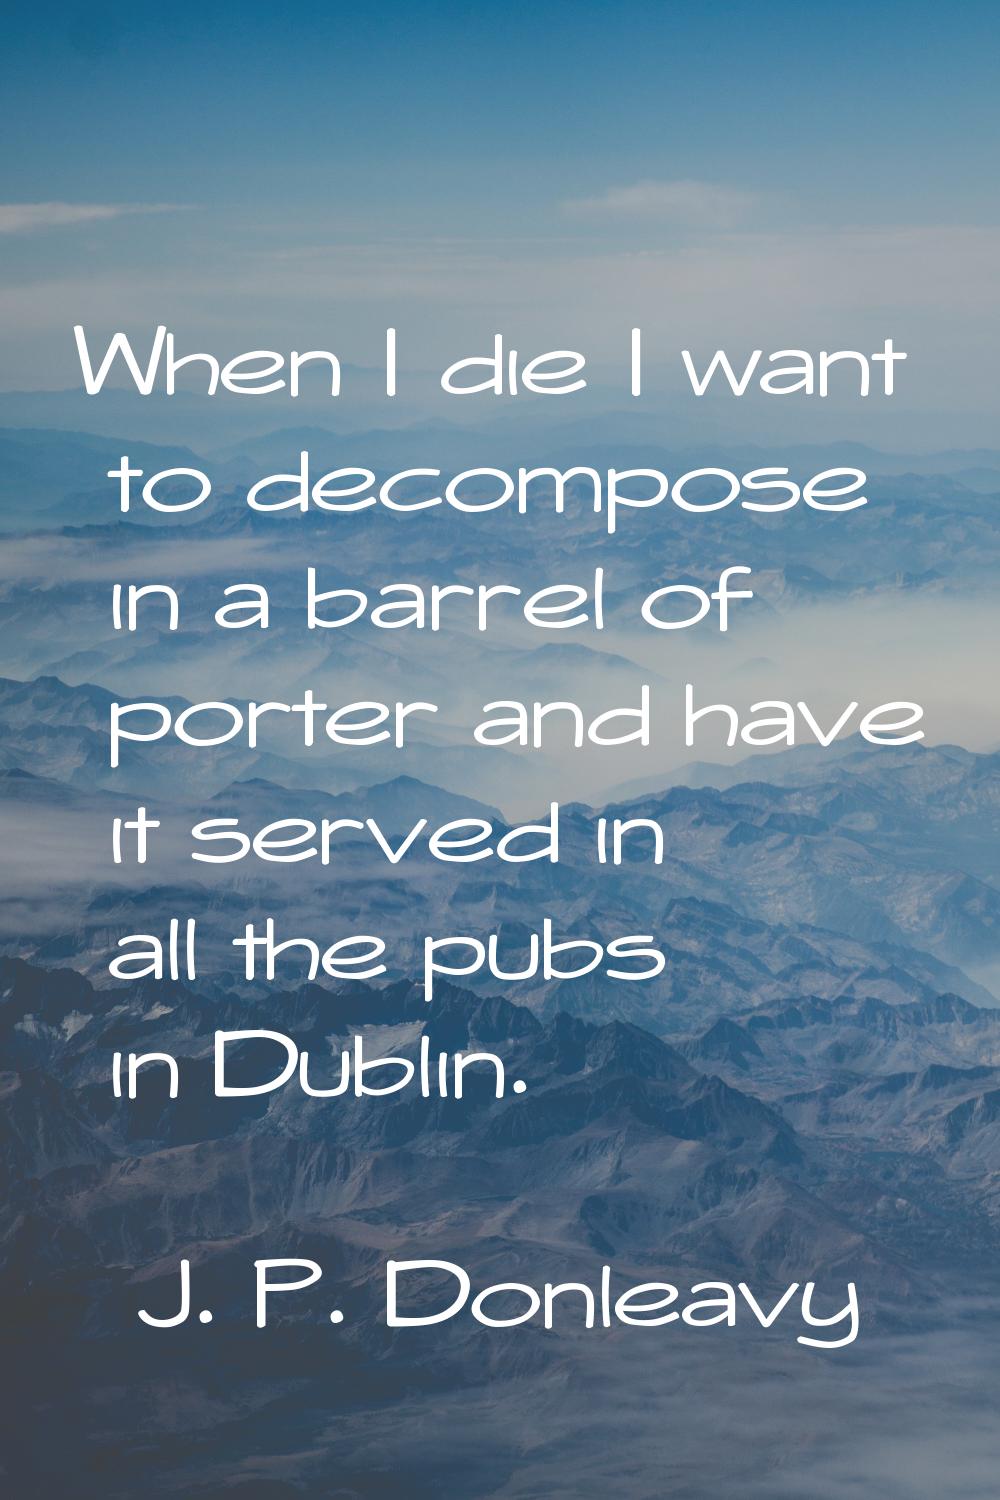 When I die I want to decompose in a barrel of porter and have it served in all the pubs in Dublin.